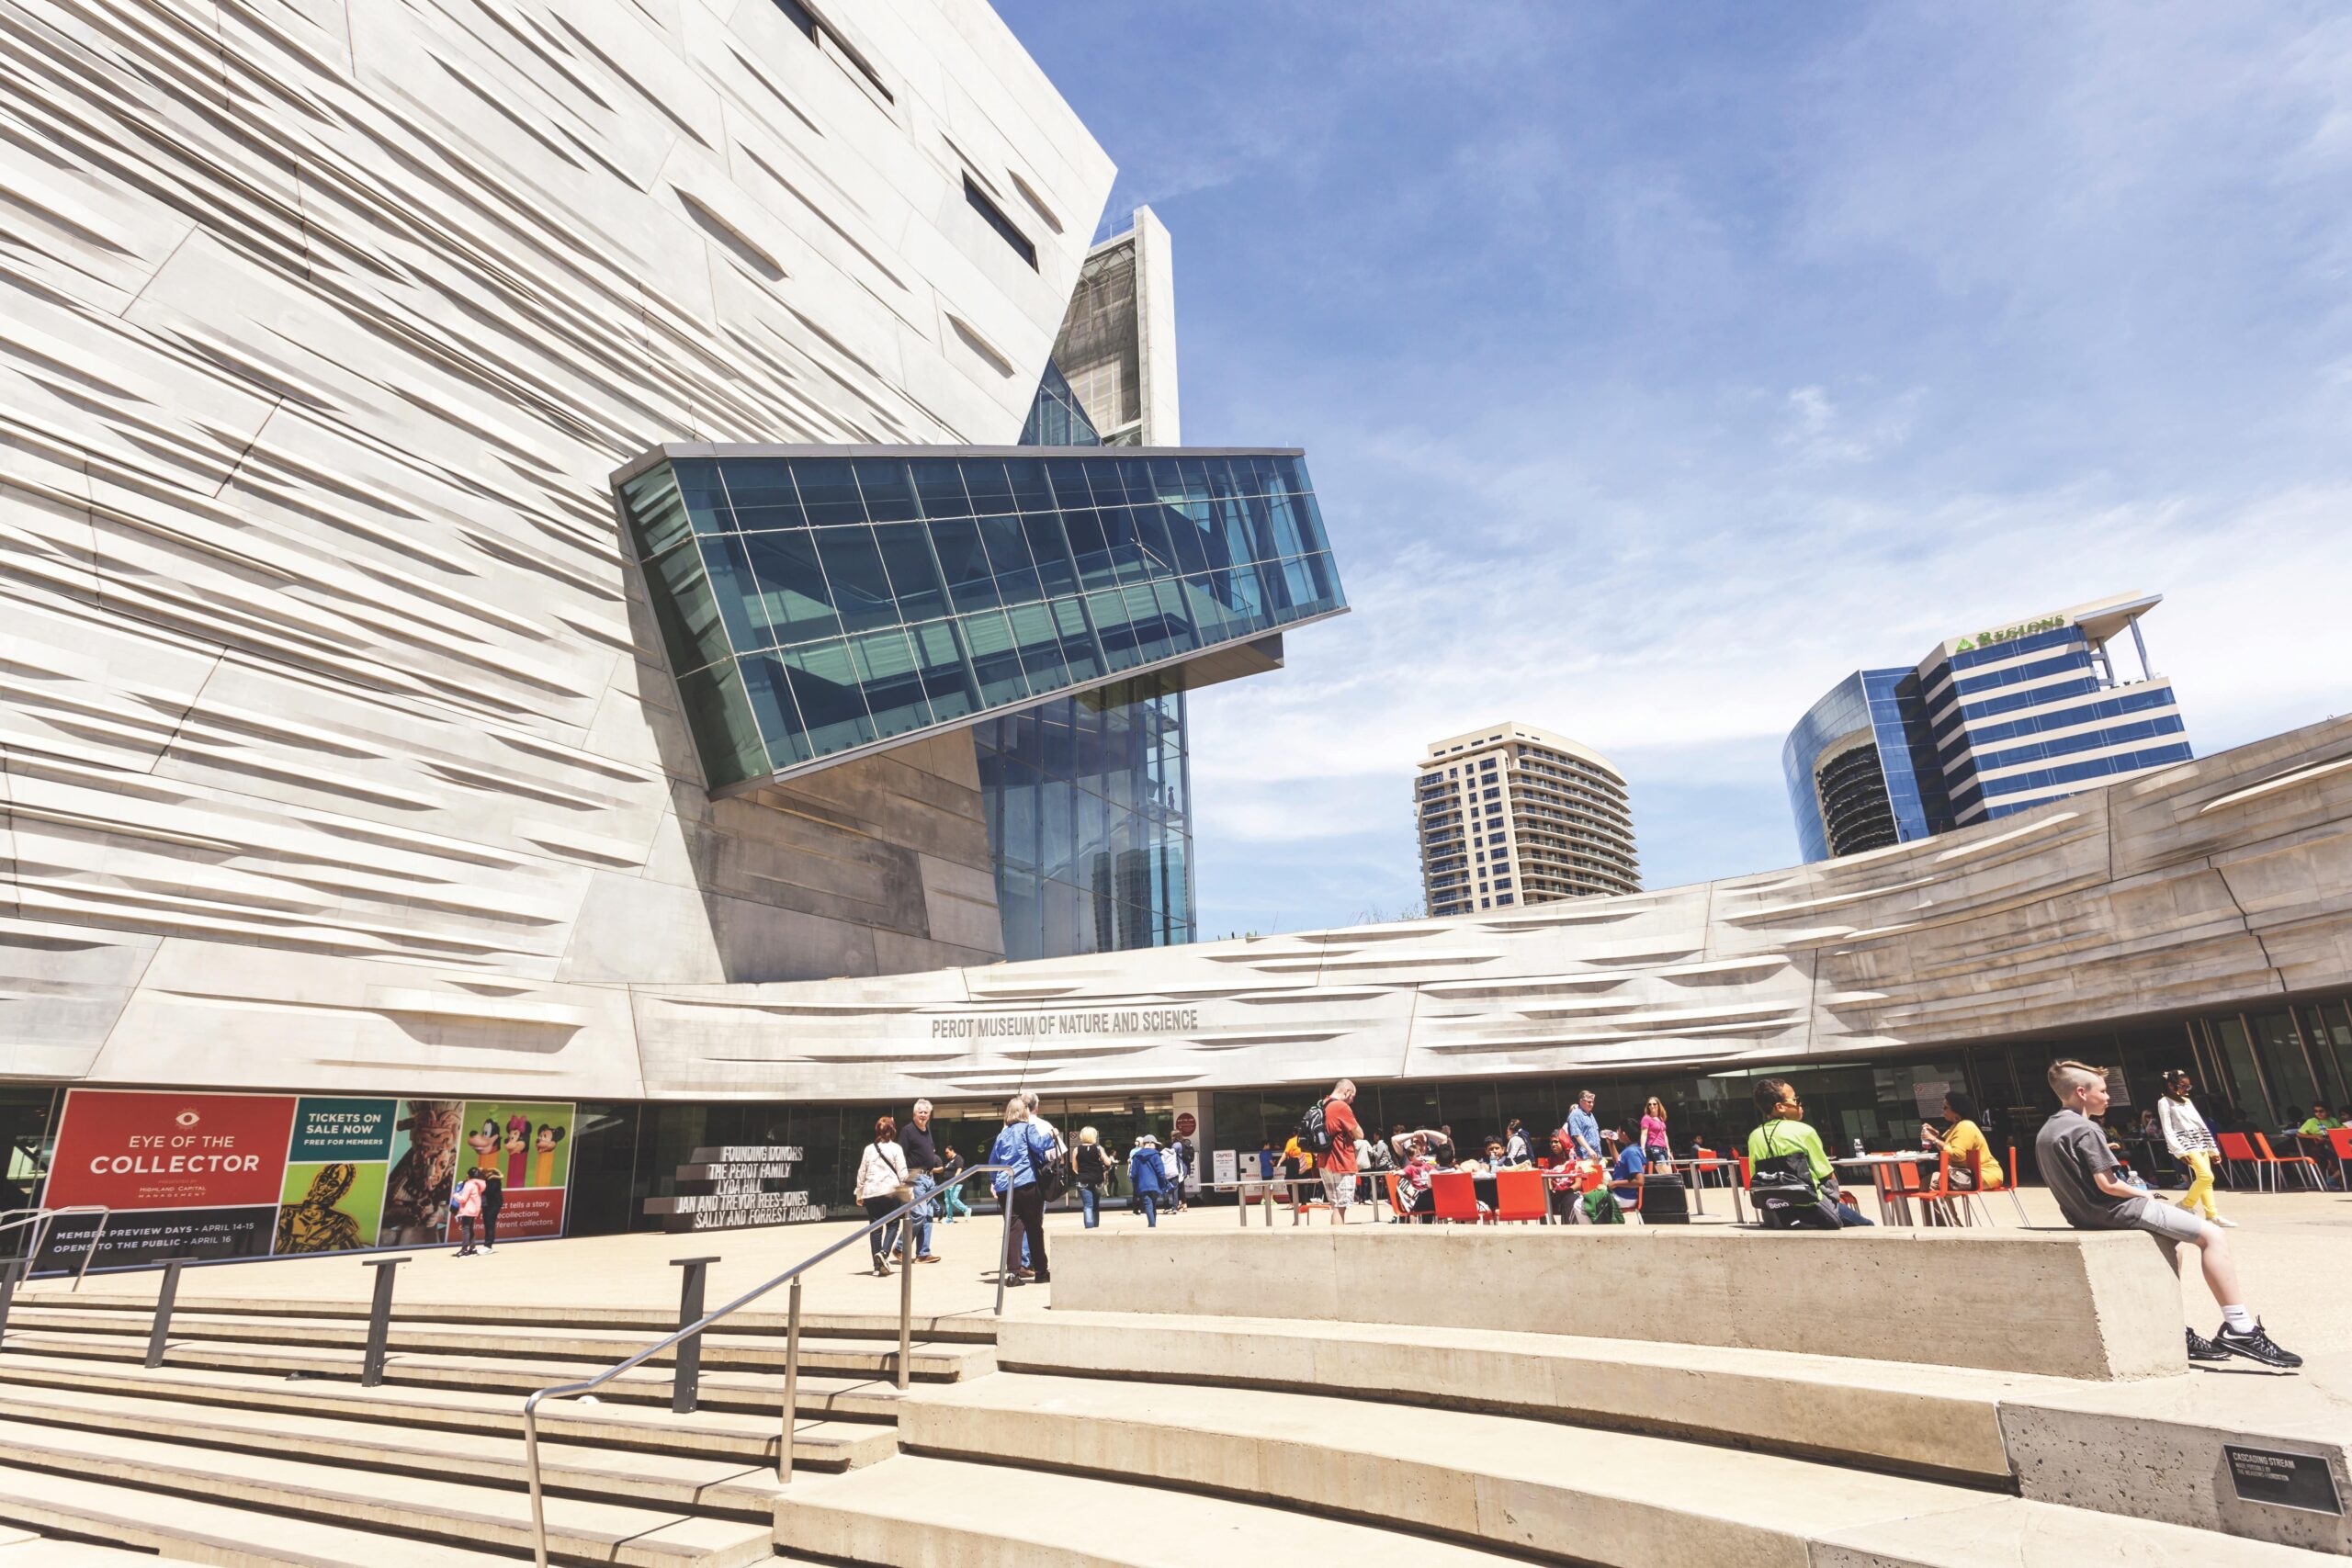 The Perot Museum of Nature and Science in Dallas has a modern exterior with people enjoying a beautiful sunny day.